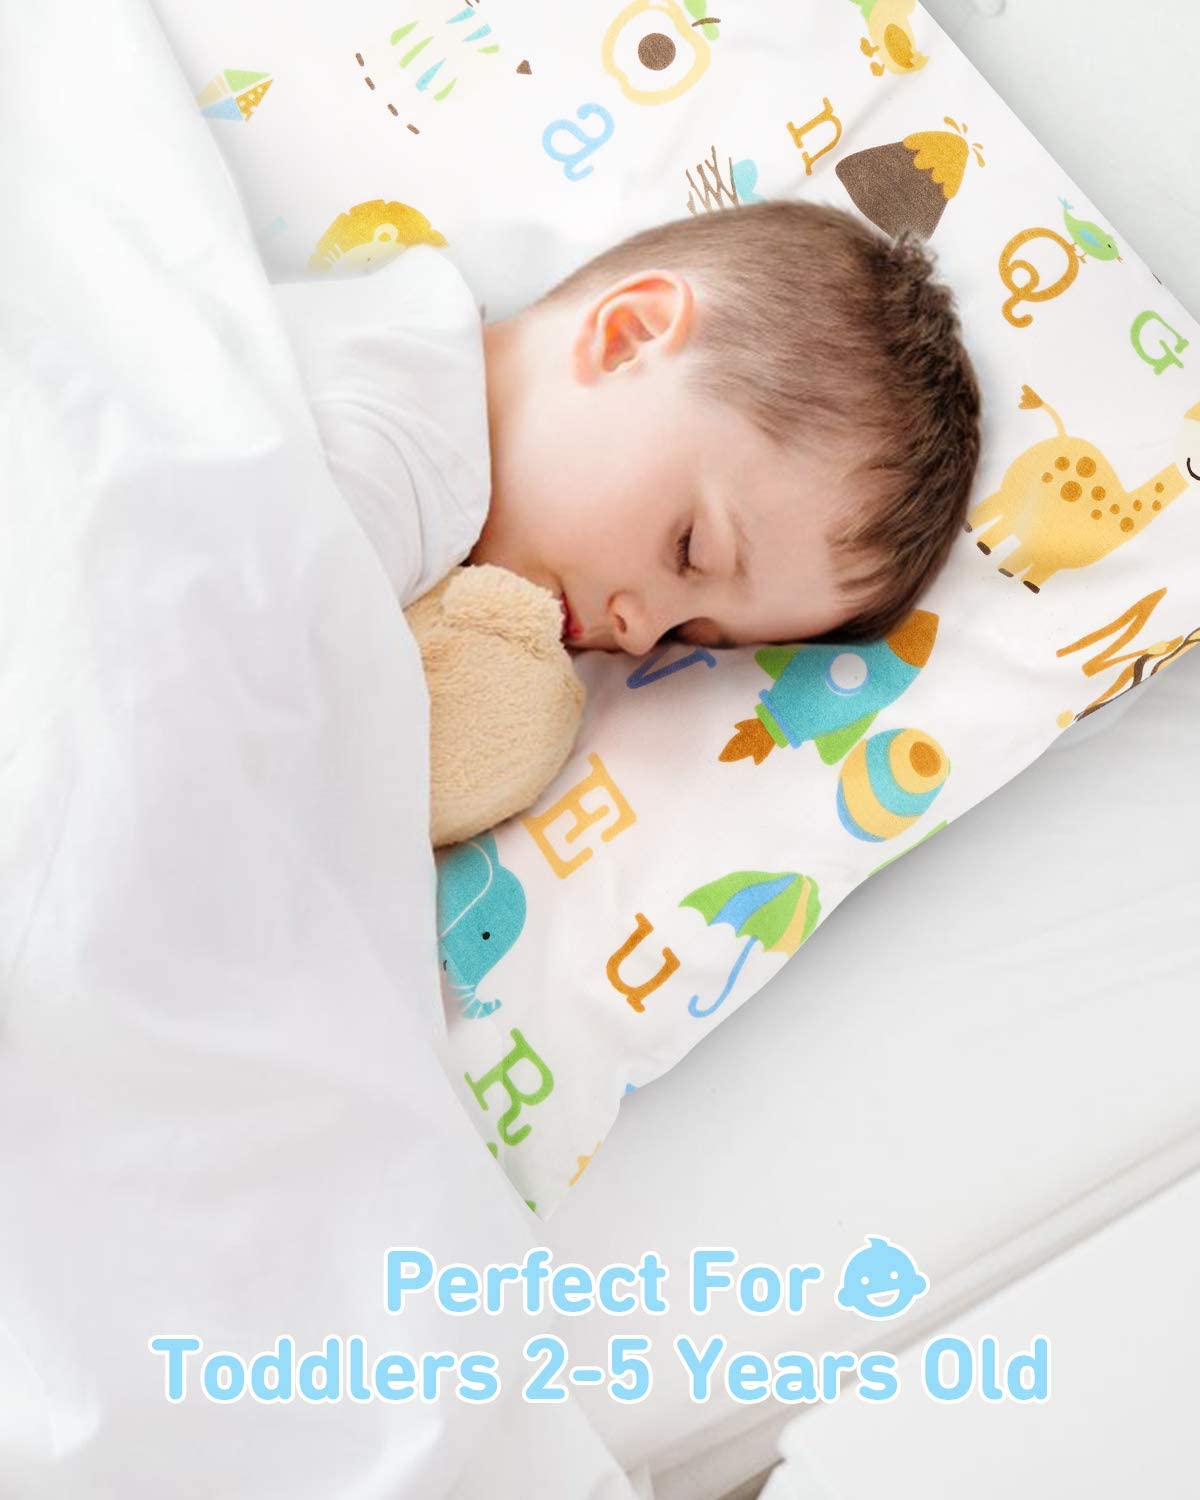 Bab Toddler Pillow,13 x 18 Inch Kids Pillows for Sleeping,1 PACK